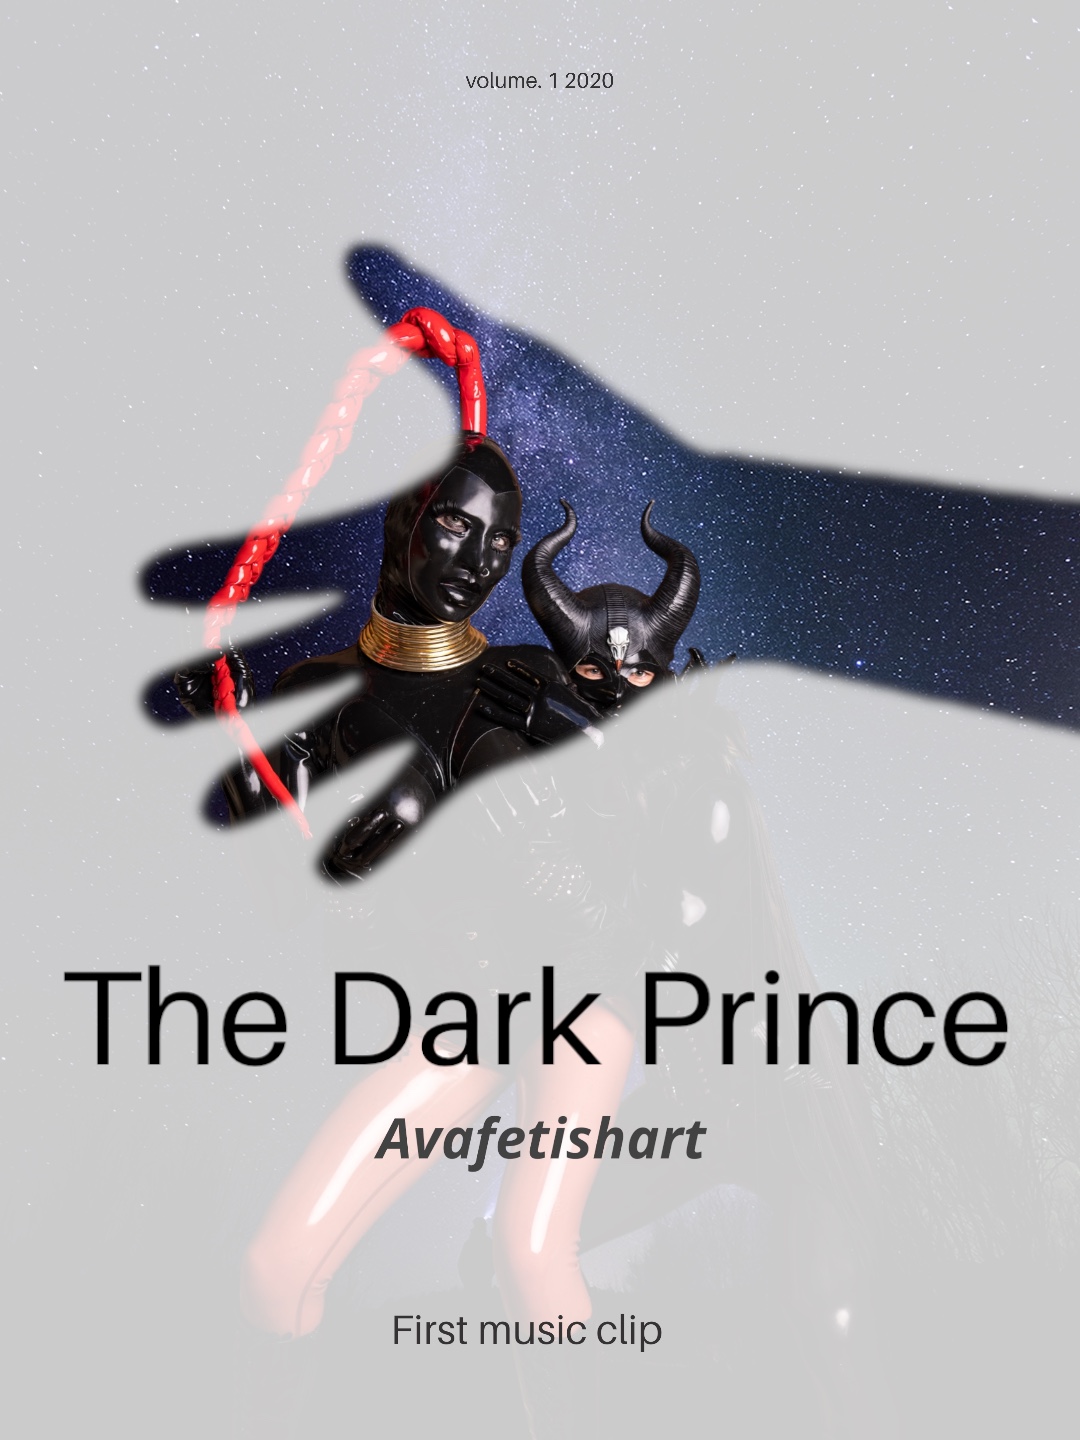 First music clip by Avafetishart ” The Dark Prince”